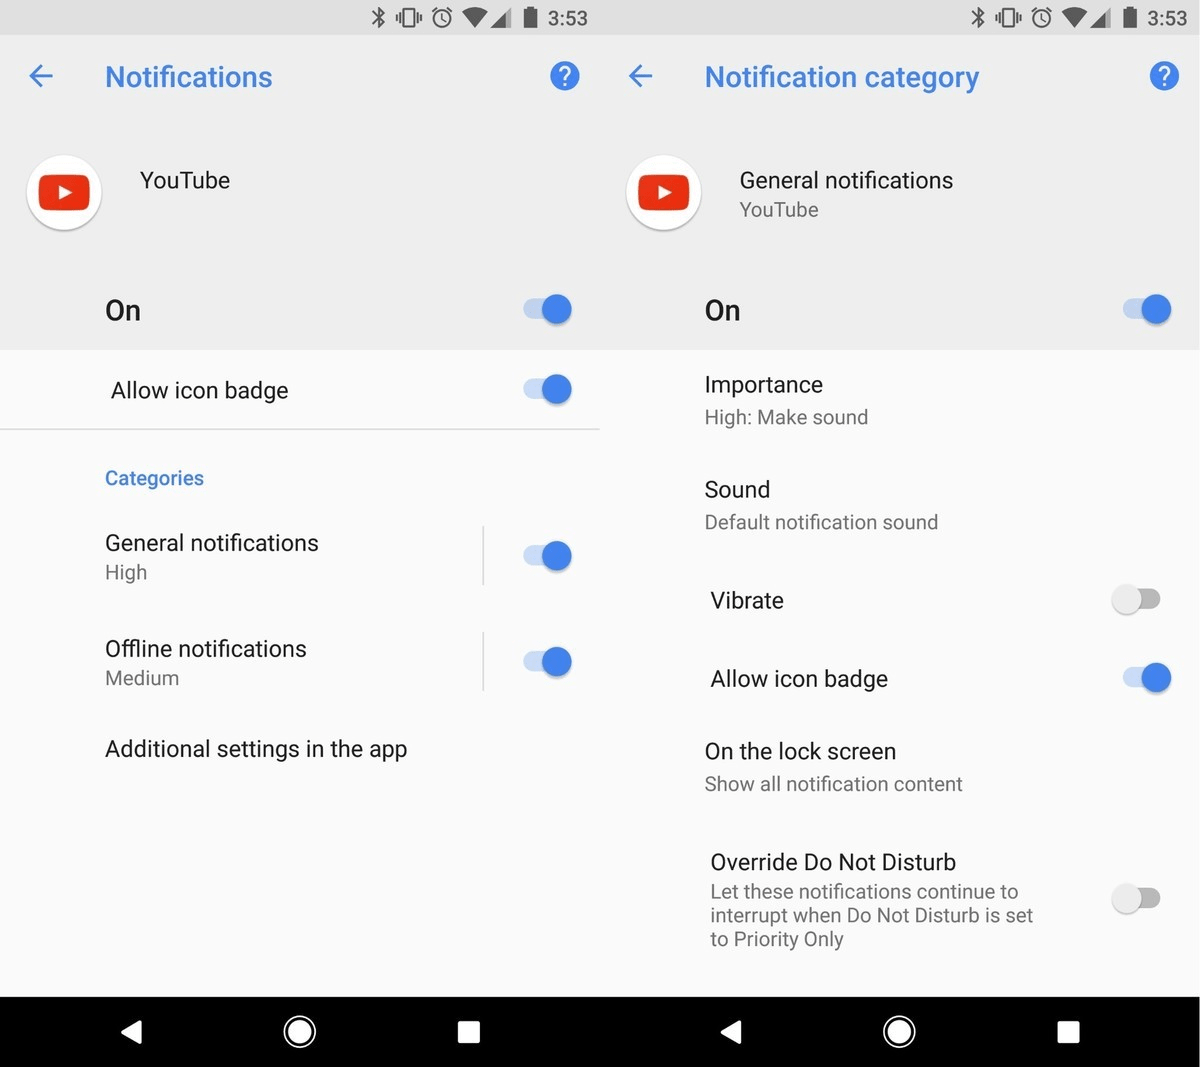 Android 8.0 introduces ‘Notification Channels’, allowing users to customize preferences for specific categories (‘channels’) of notifications 